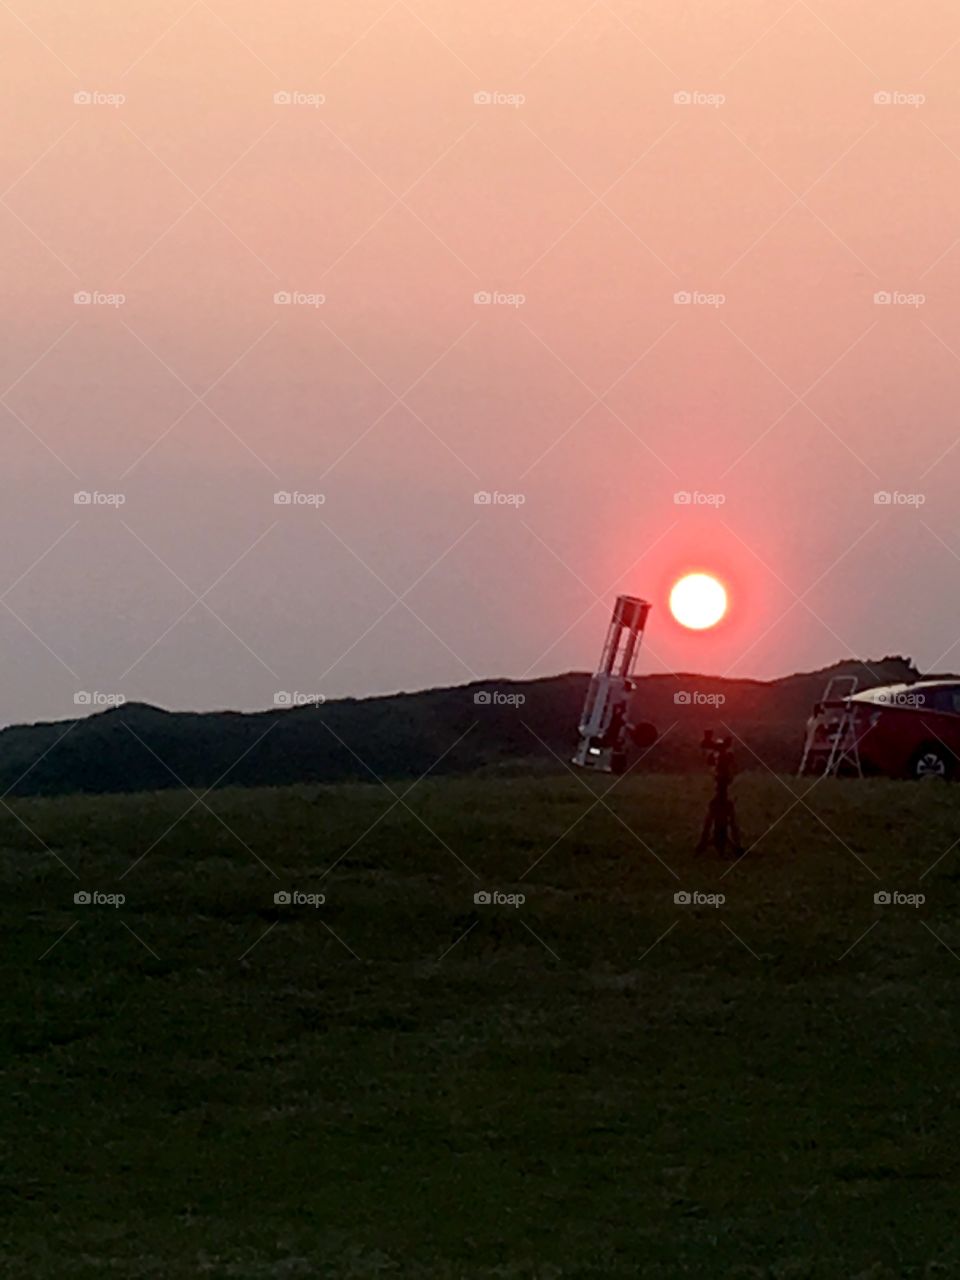 Large telescope on a hill at sunset. Star gazers waiting for the stars to come out.